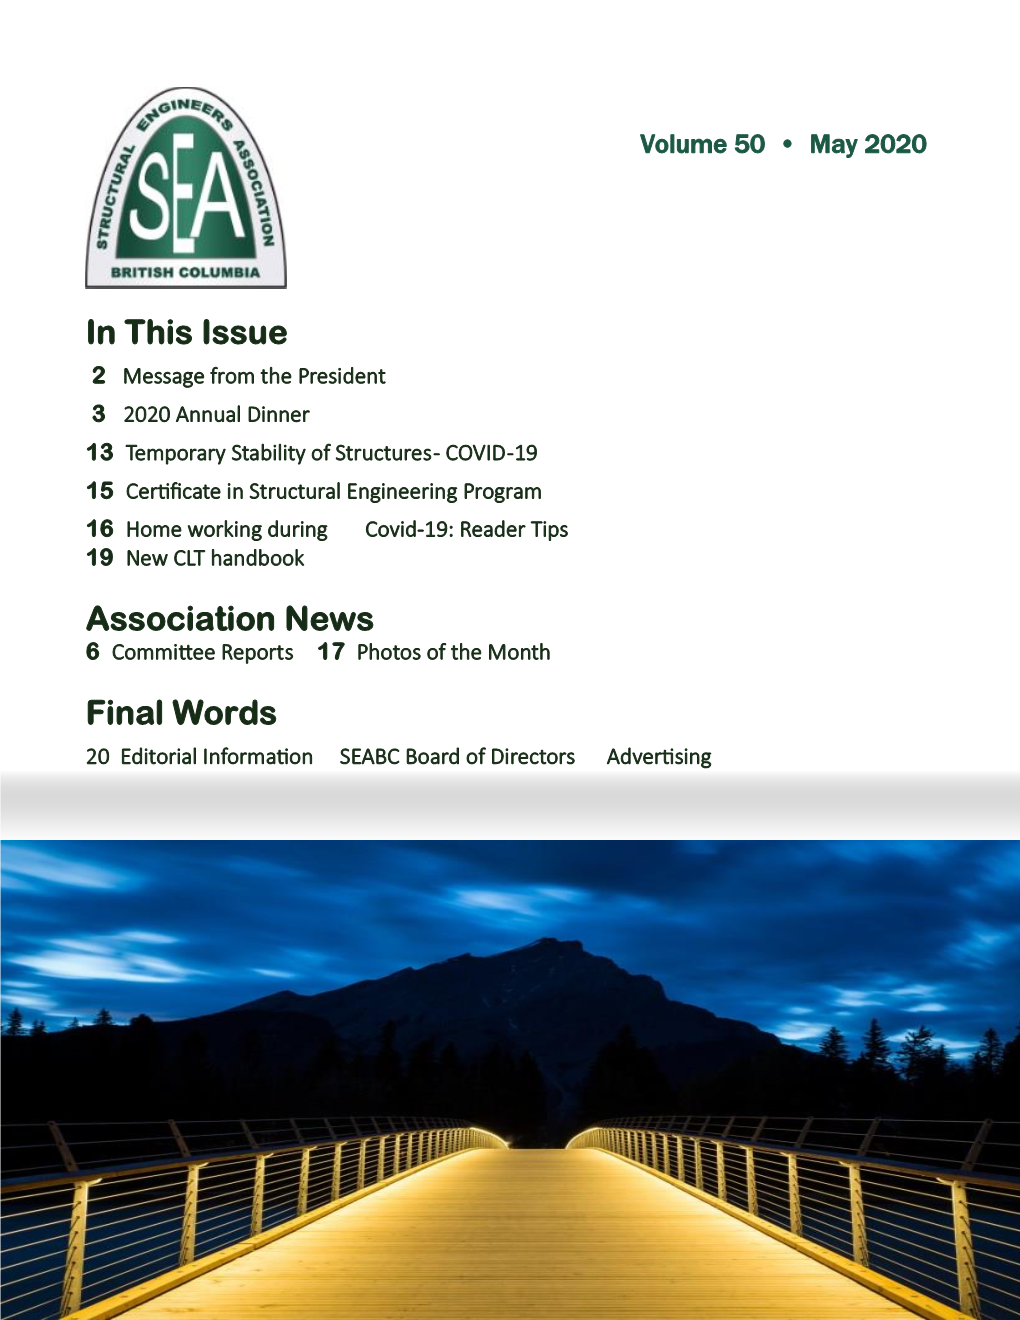 SEABC Newsletter • Volume 50 • May 2020 Page 1